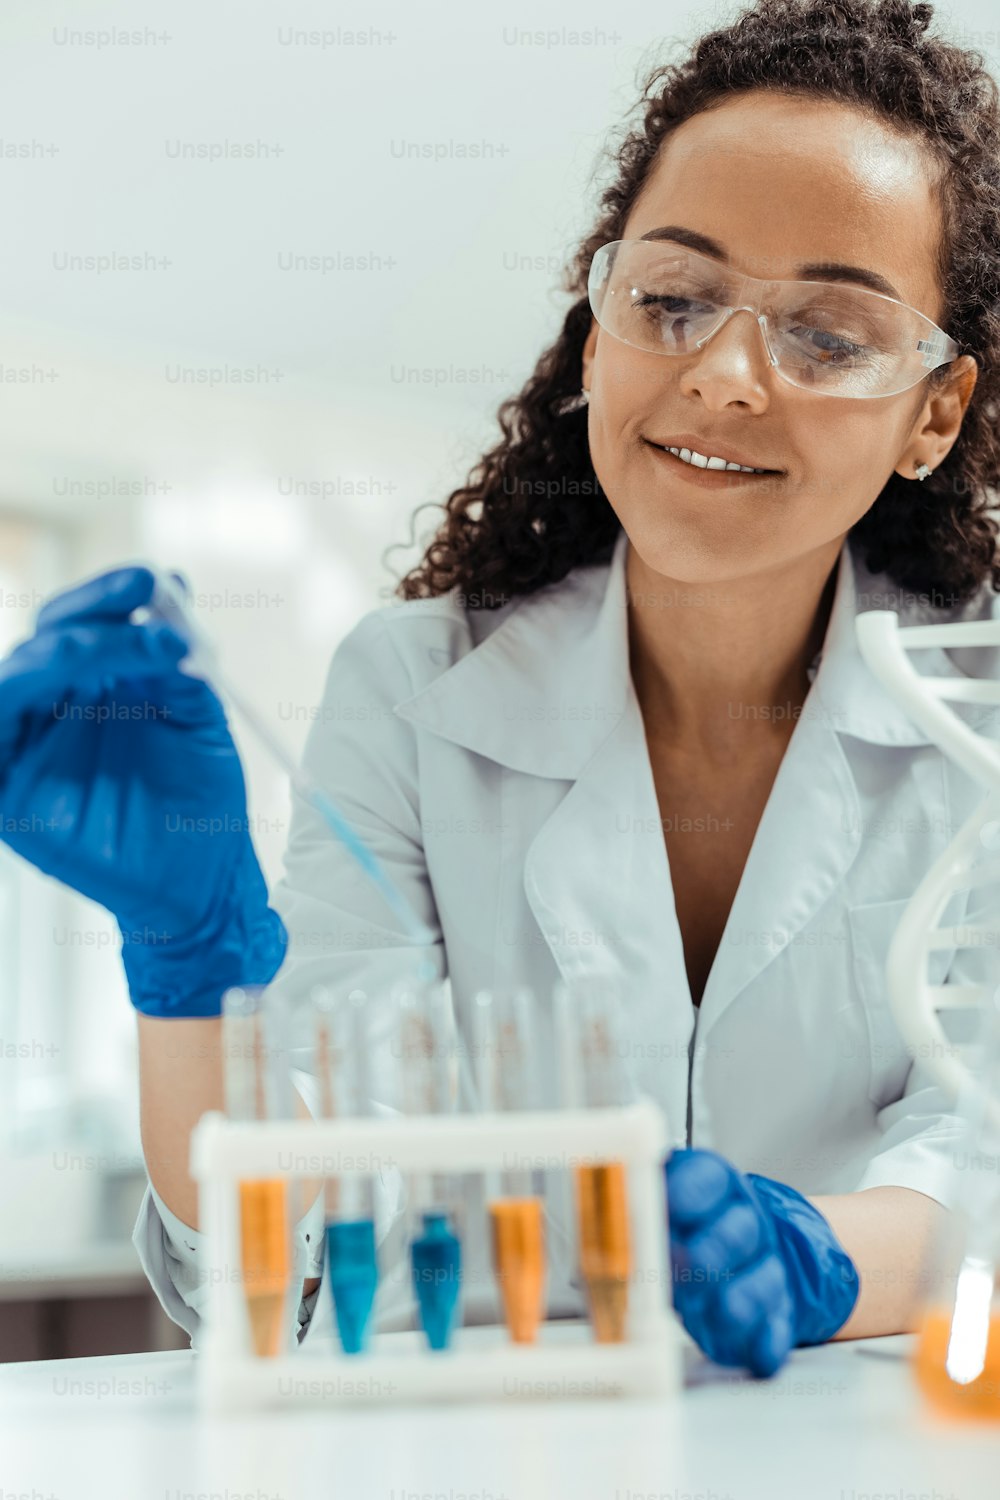 Great mood. Positive young woman looking at the test tubes while enjoying her job in the lab